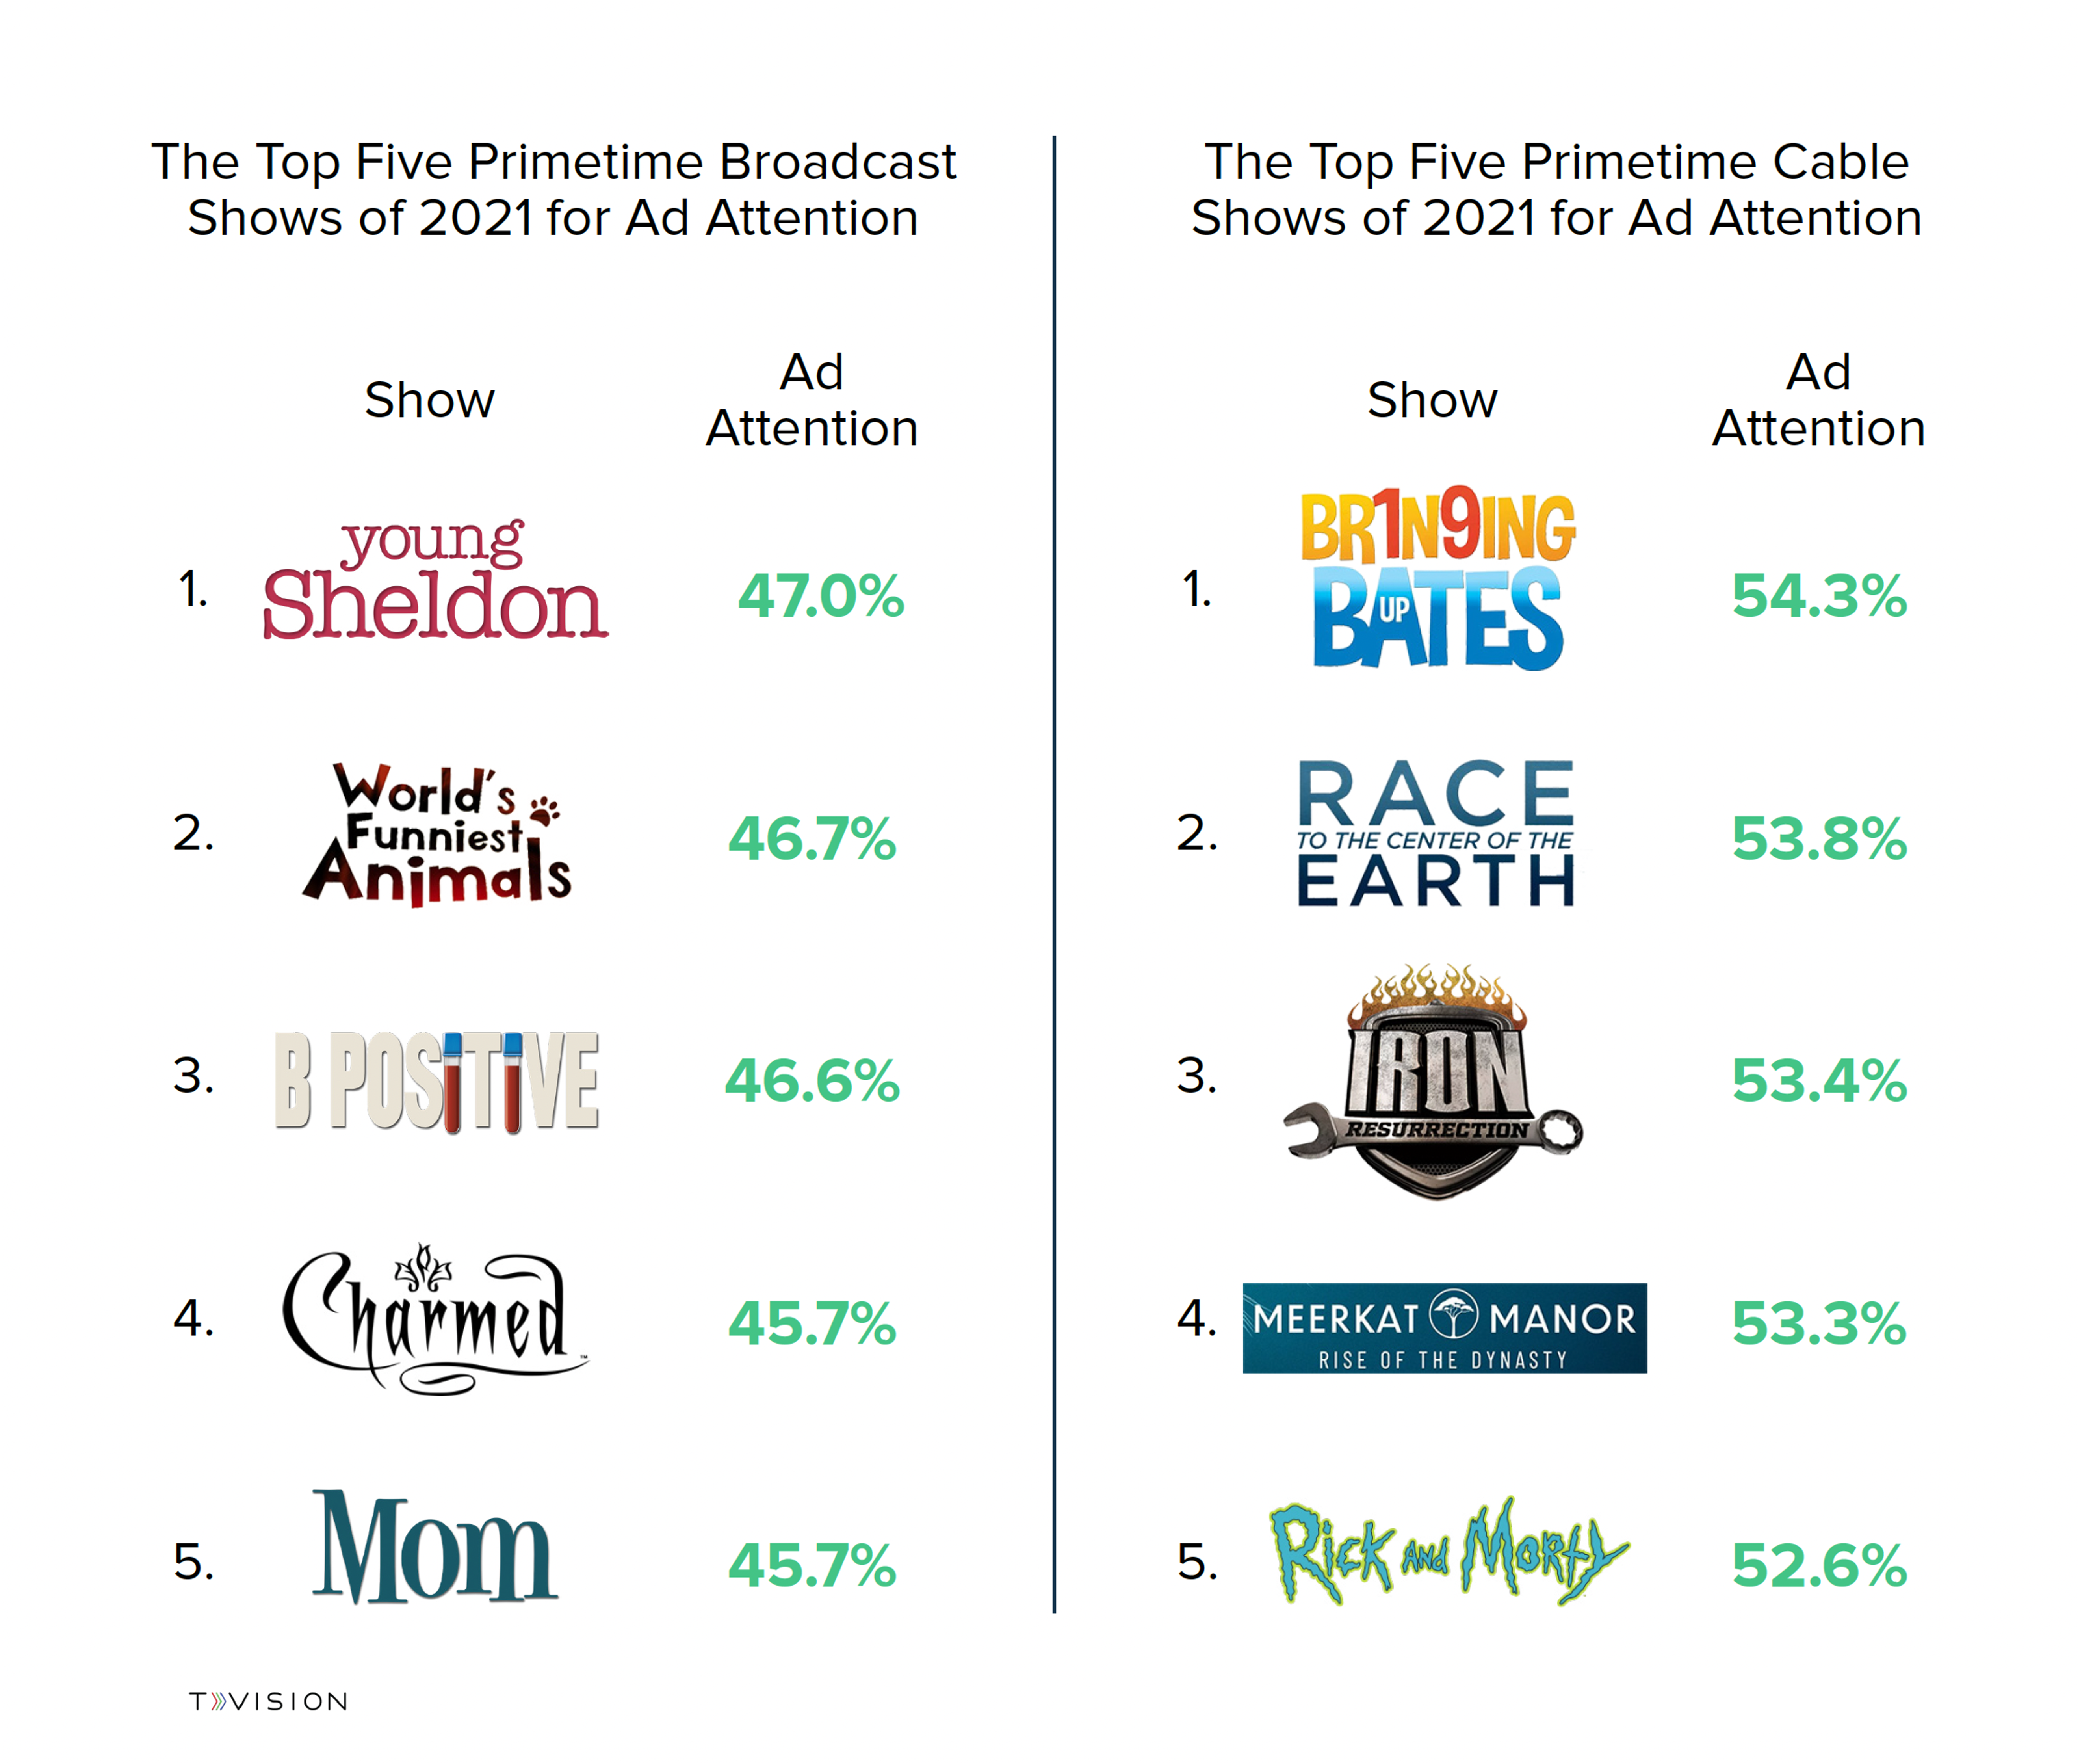 Top Linear Shows for Ad Attention